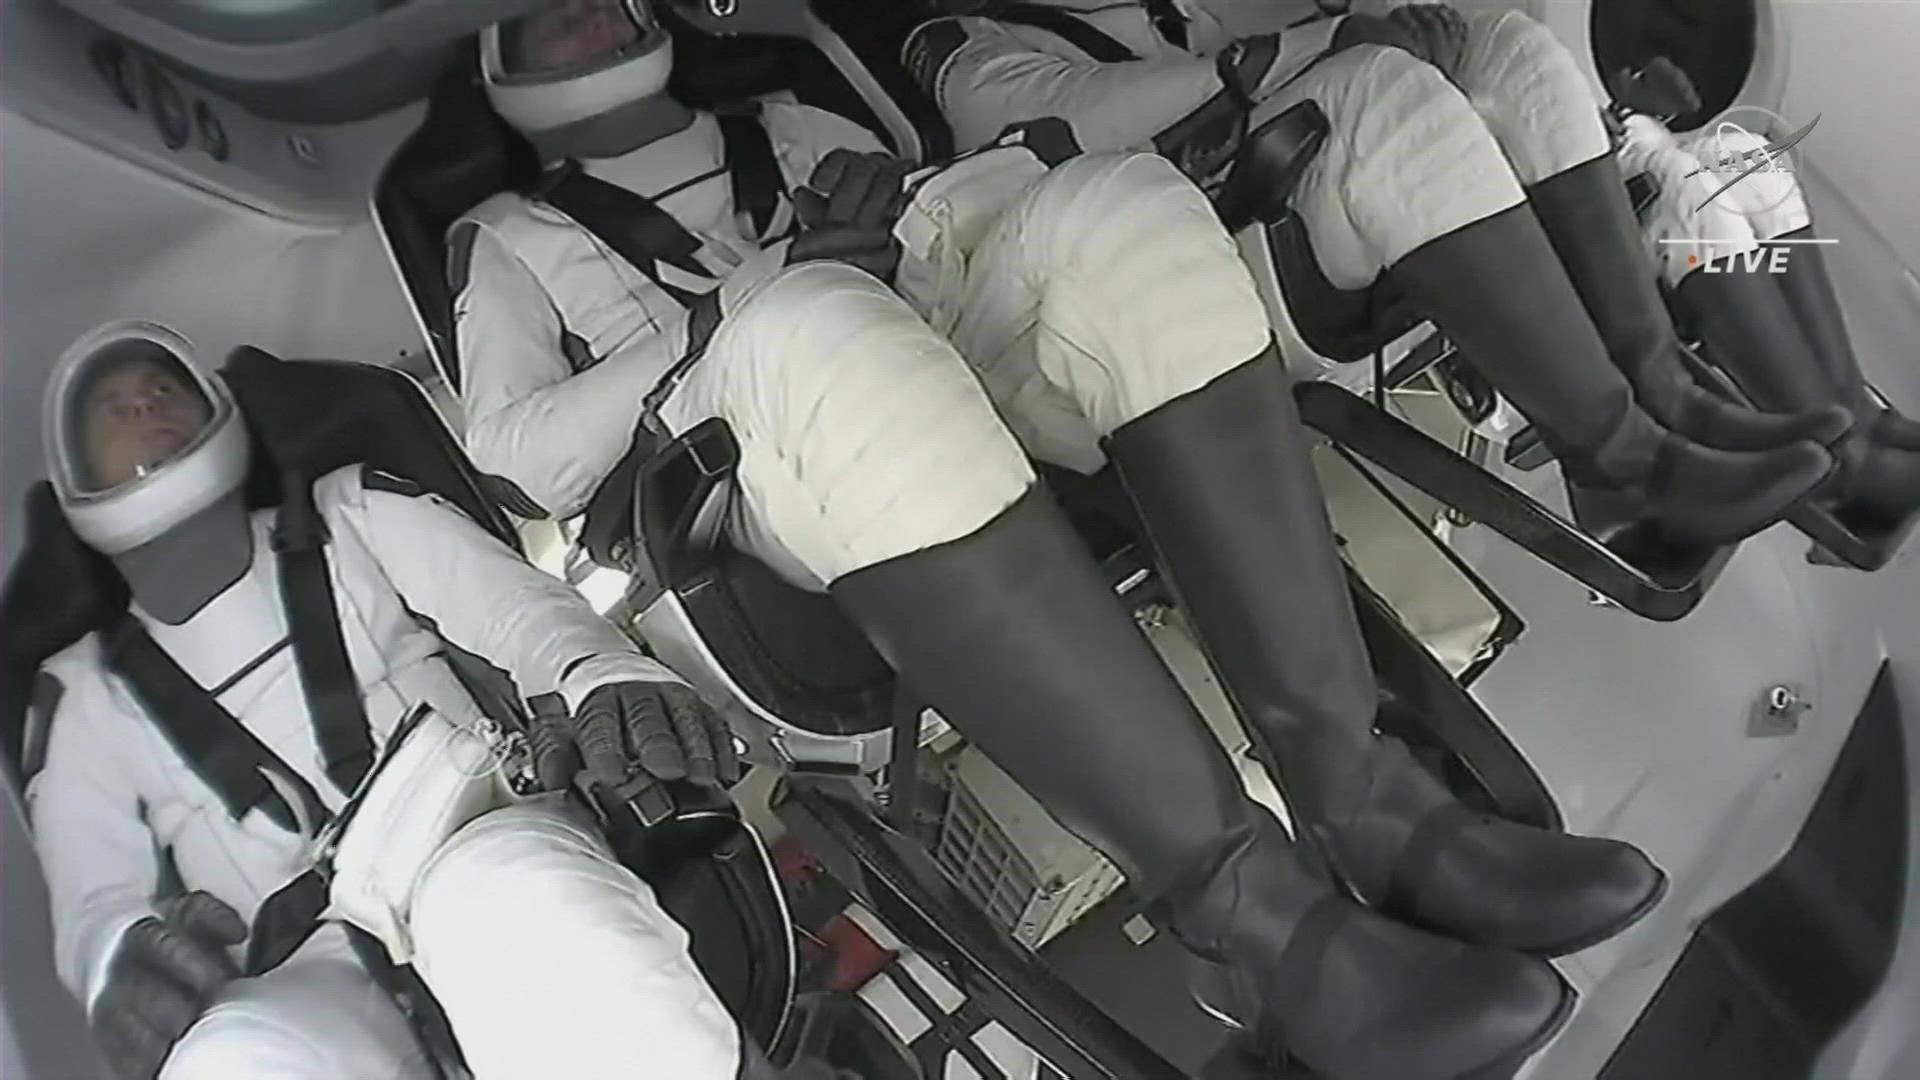 The launch featuring 2 NASA astronauts, a cosmonaut and an astronaut from the United Arab Emirates was called off 2 minutes prior to launch due to a mechanical issue